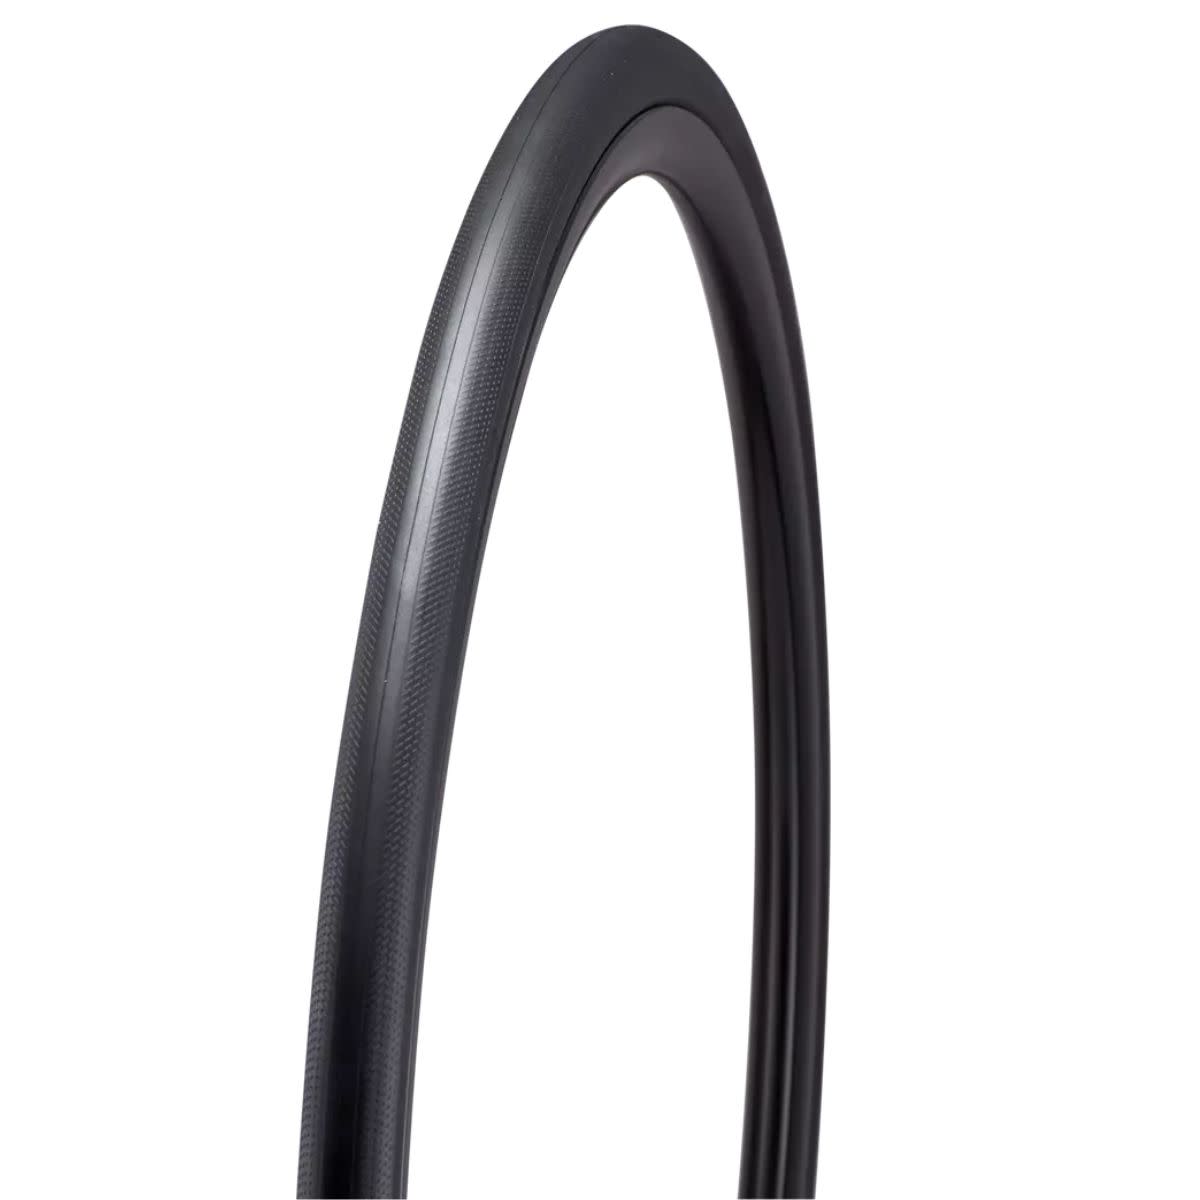 Specialized S-Works Turbo 2Bliss Ready T2/T5 Tire 700c x 28mm